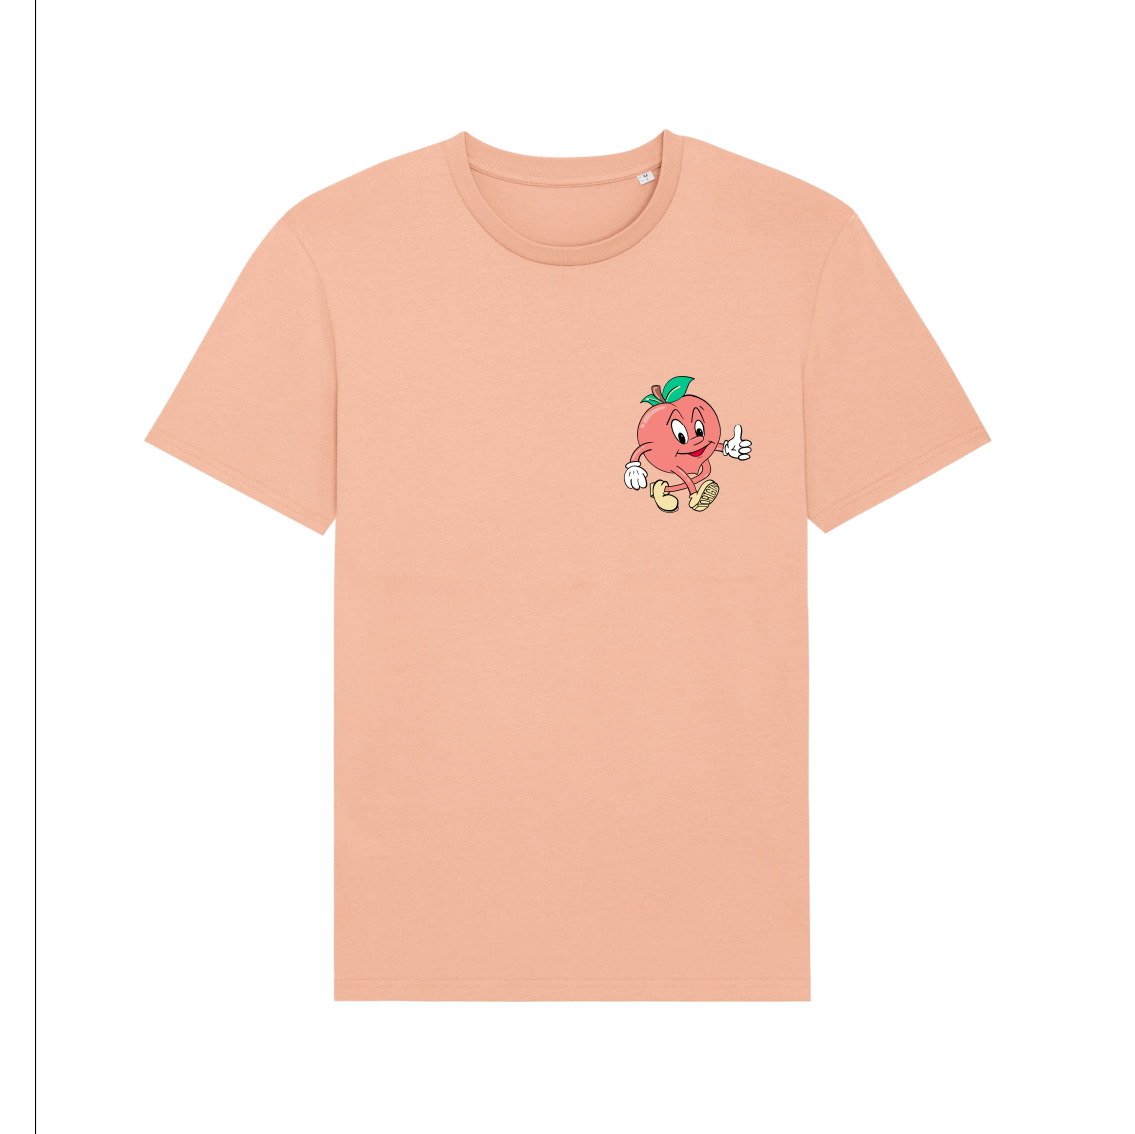 Peaches & Cleans Classic Fit Tee